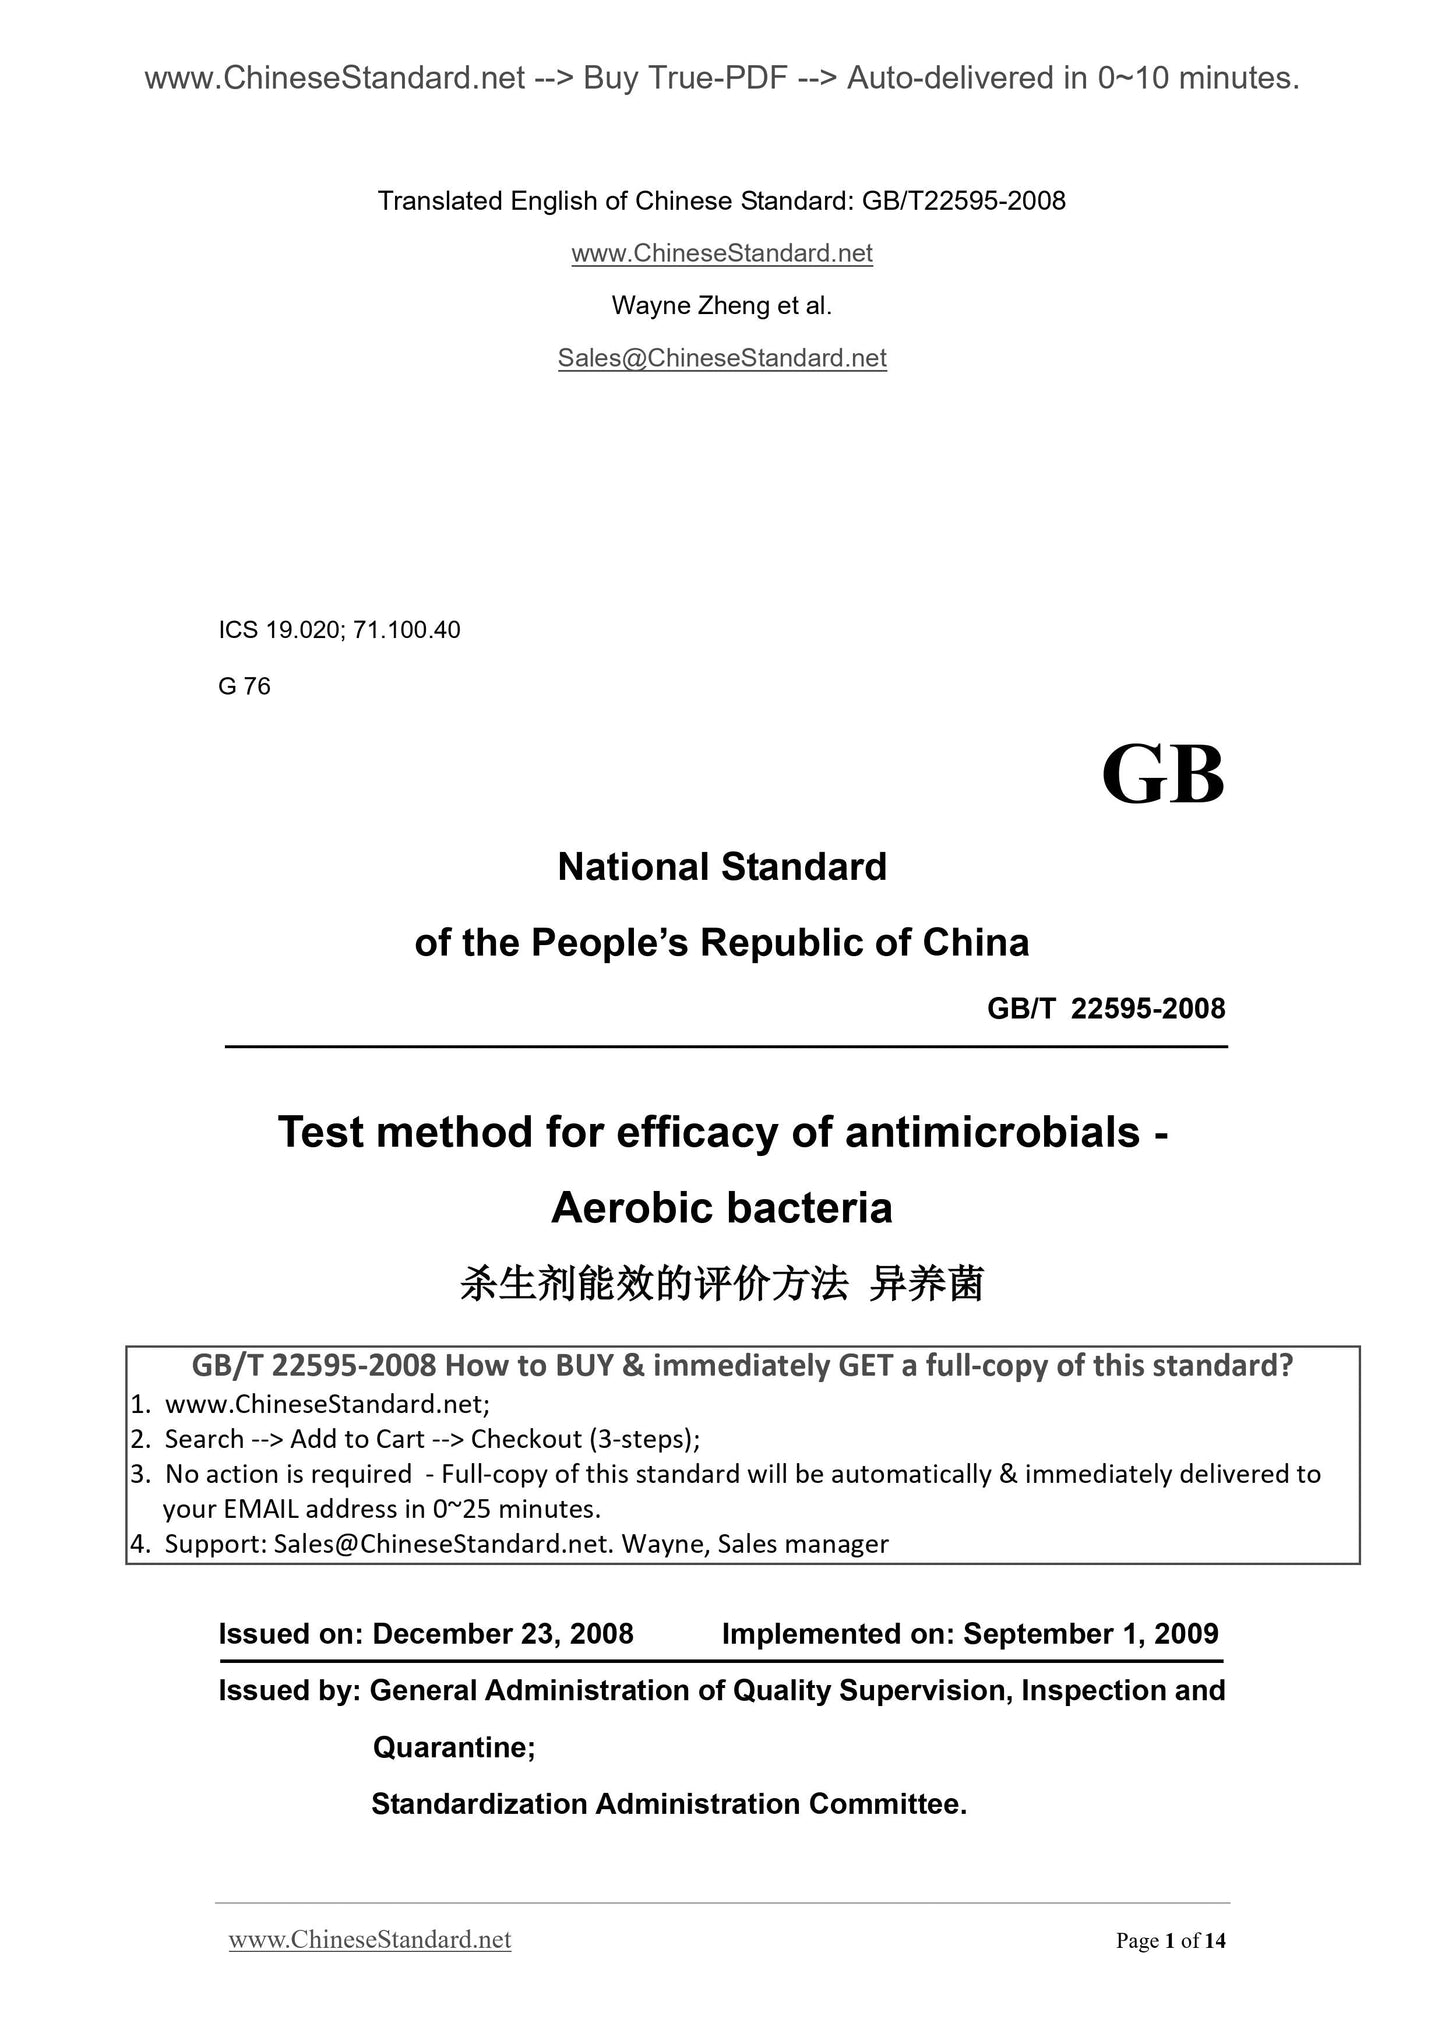 GB/T 22595-2008 Page 1